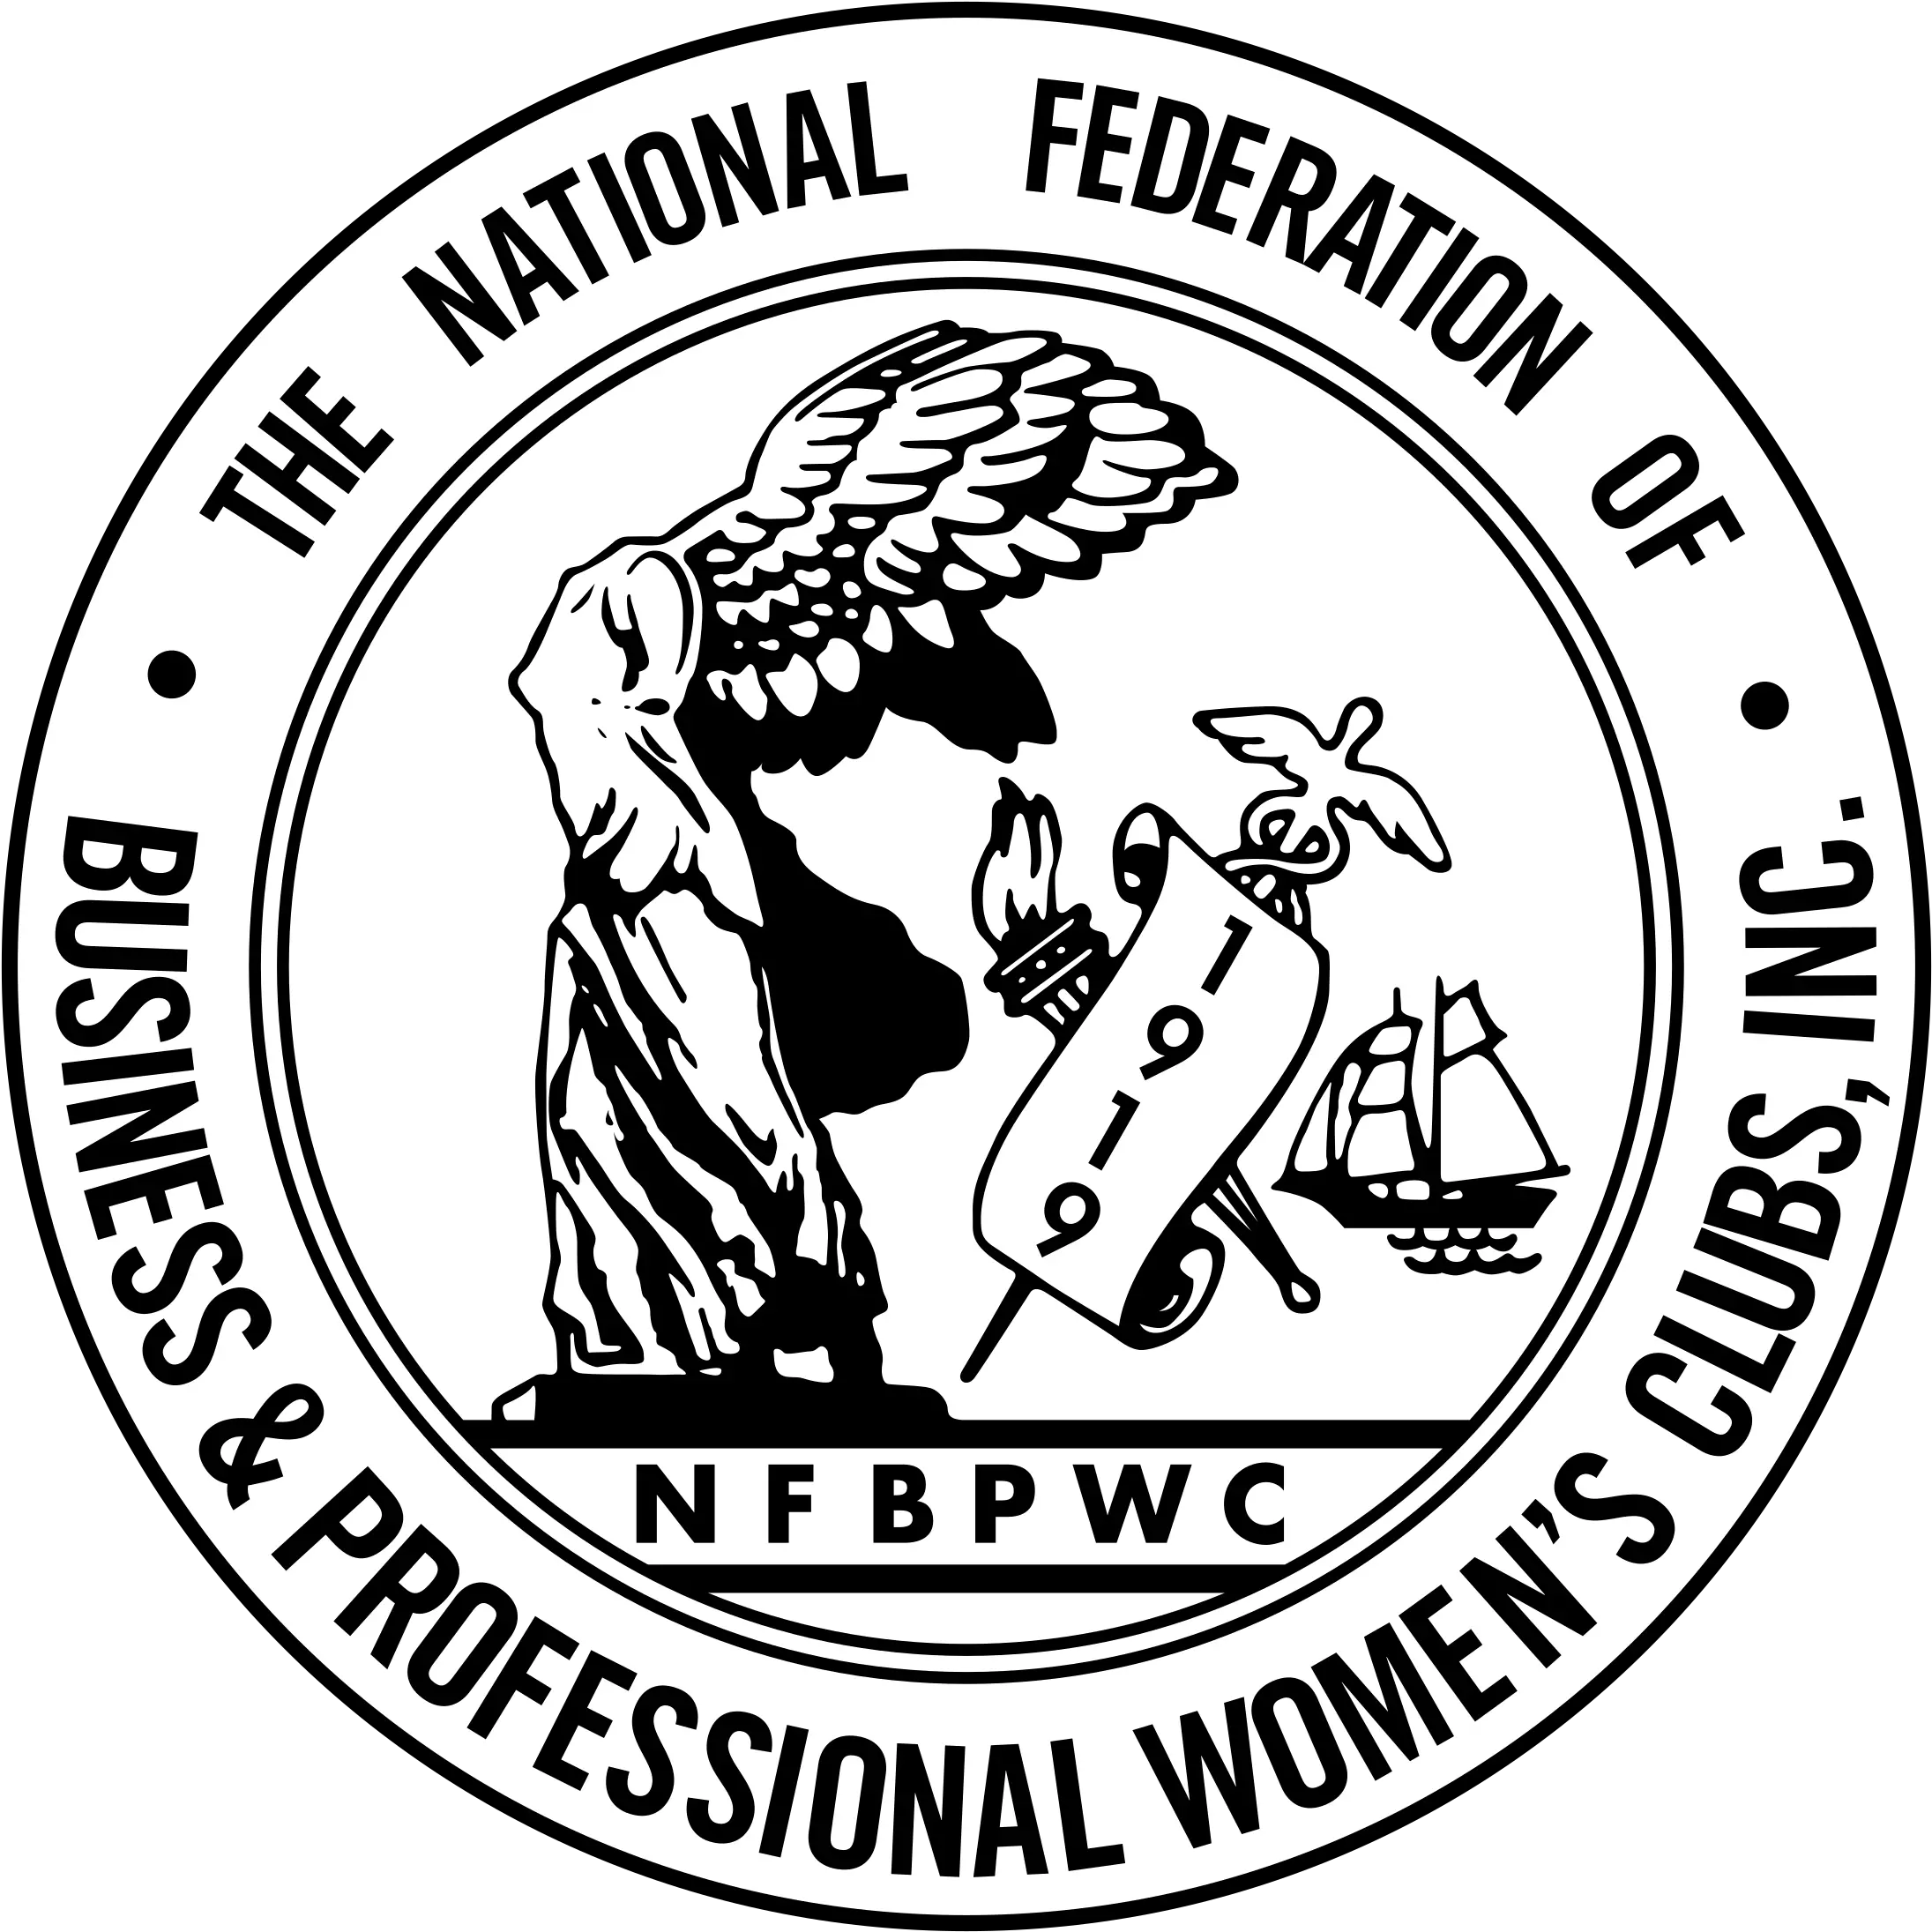 Nfbpwc Logo Png Transparent U0026 Svg Vector Freebie Supply National Federation Of Business And Professional Clubs Obs Logo Png